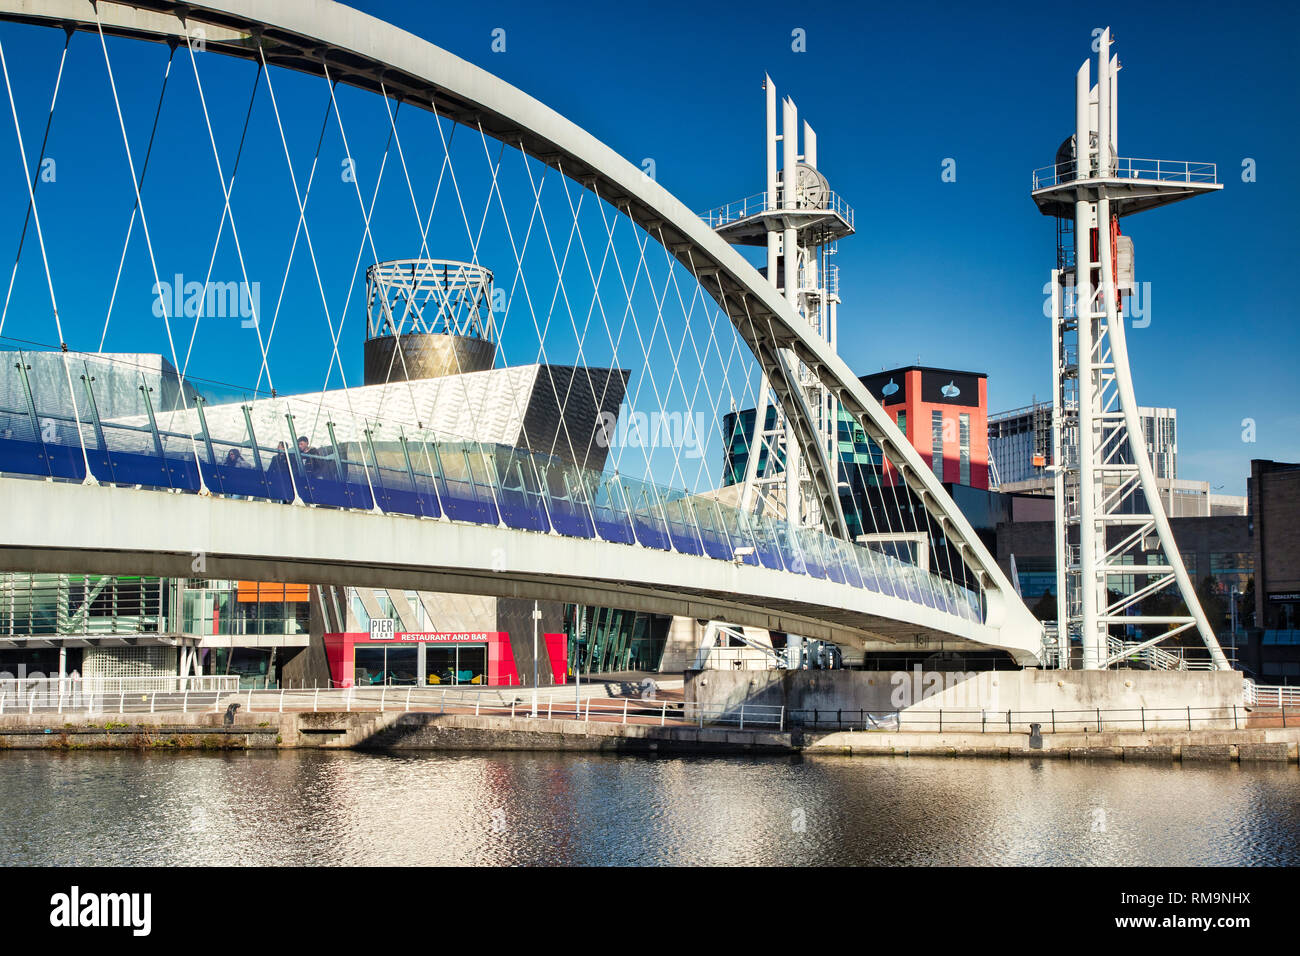 2 November 2018: Salford Quays, Manchester, UK - The Lowry Bridge on a lovely sunny autumn day, with clear blue sky. Stock Photo